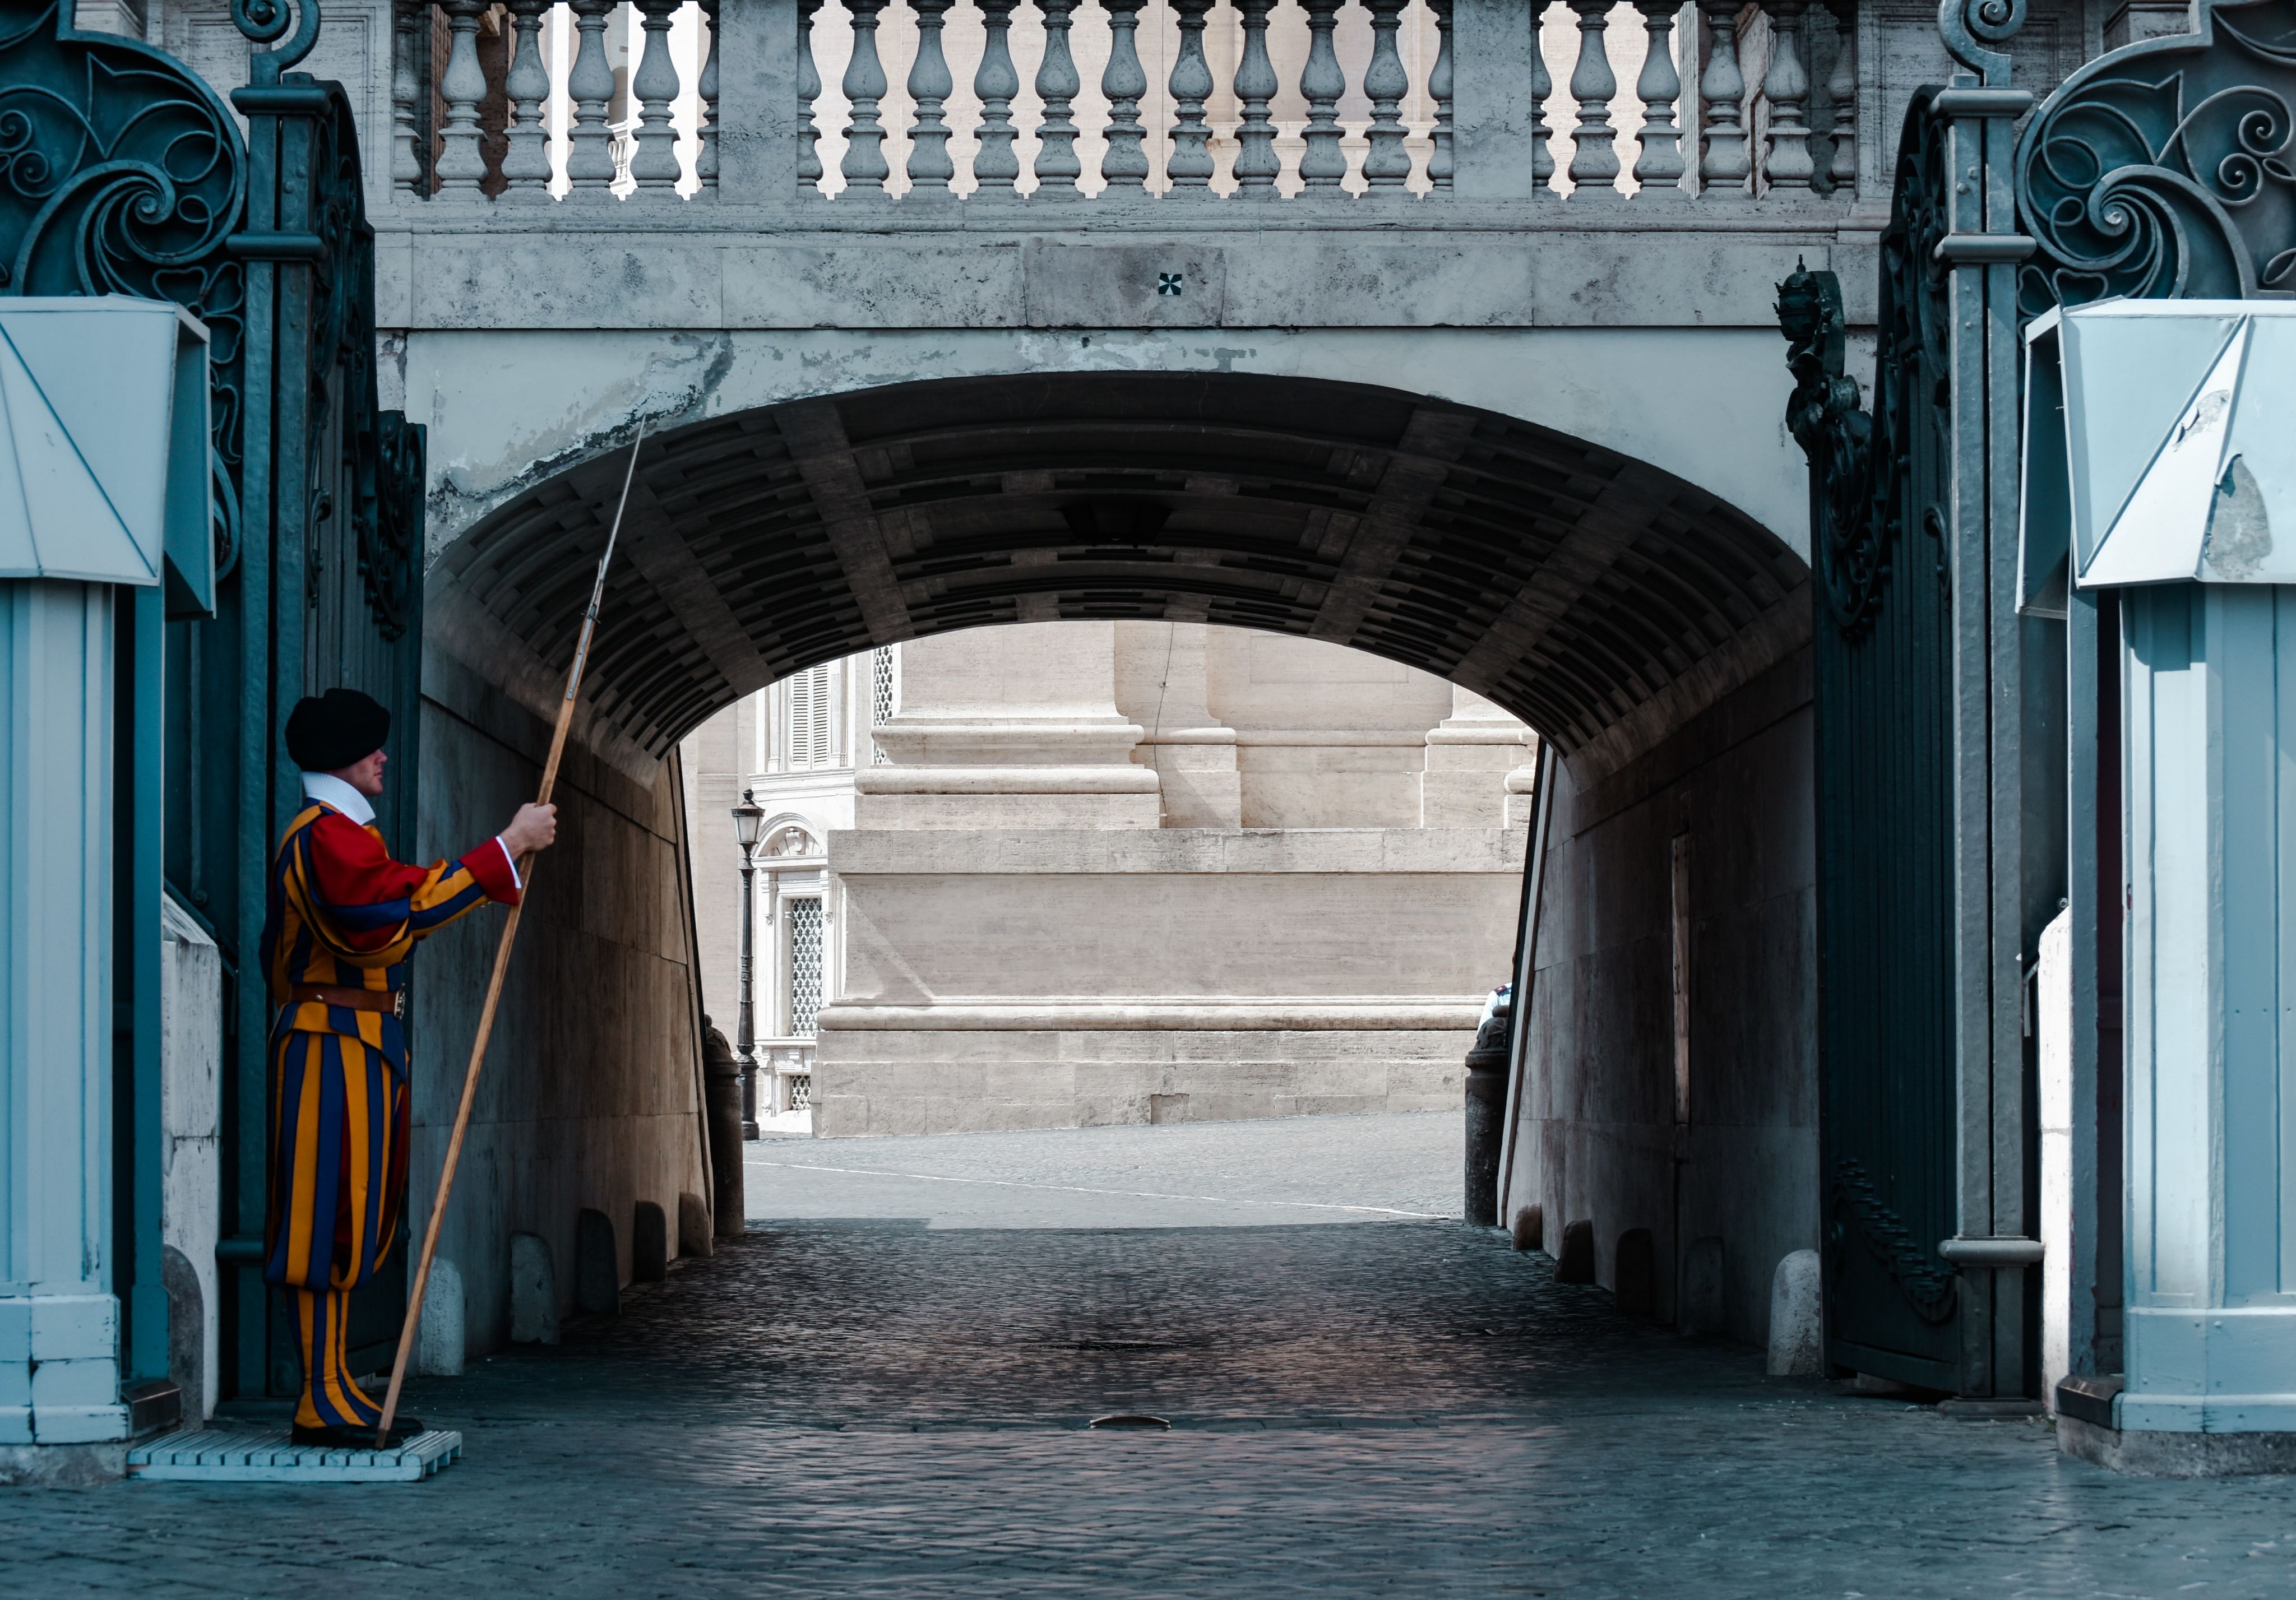 A Swiss Guard standing guard at the Vatican